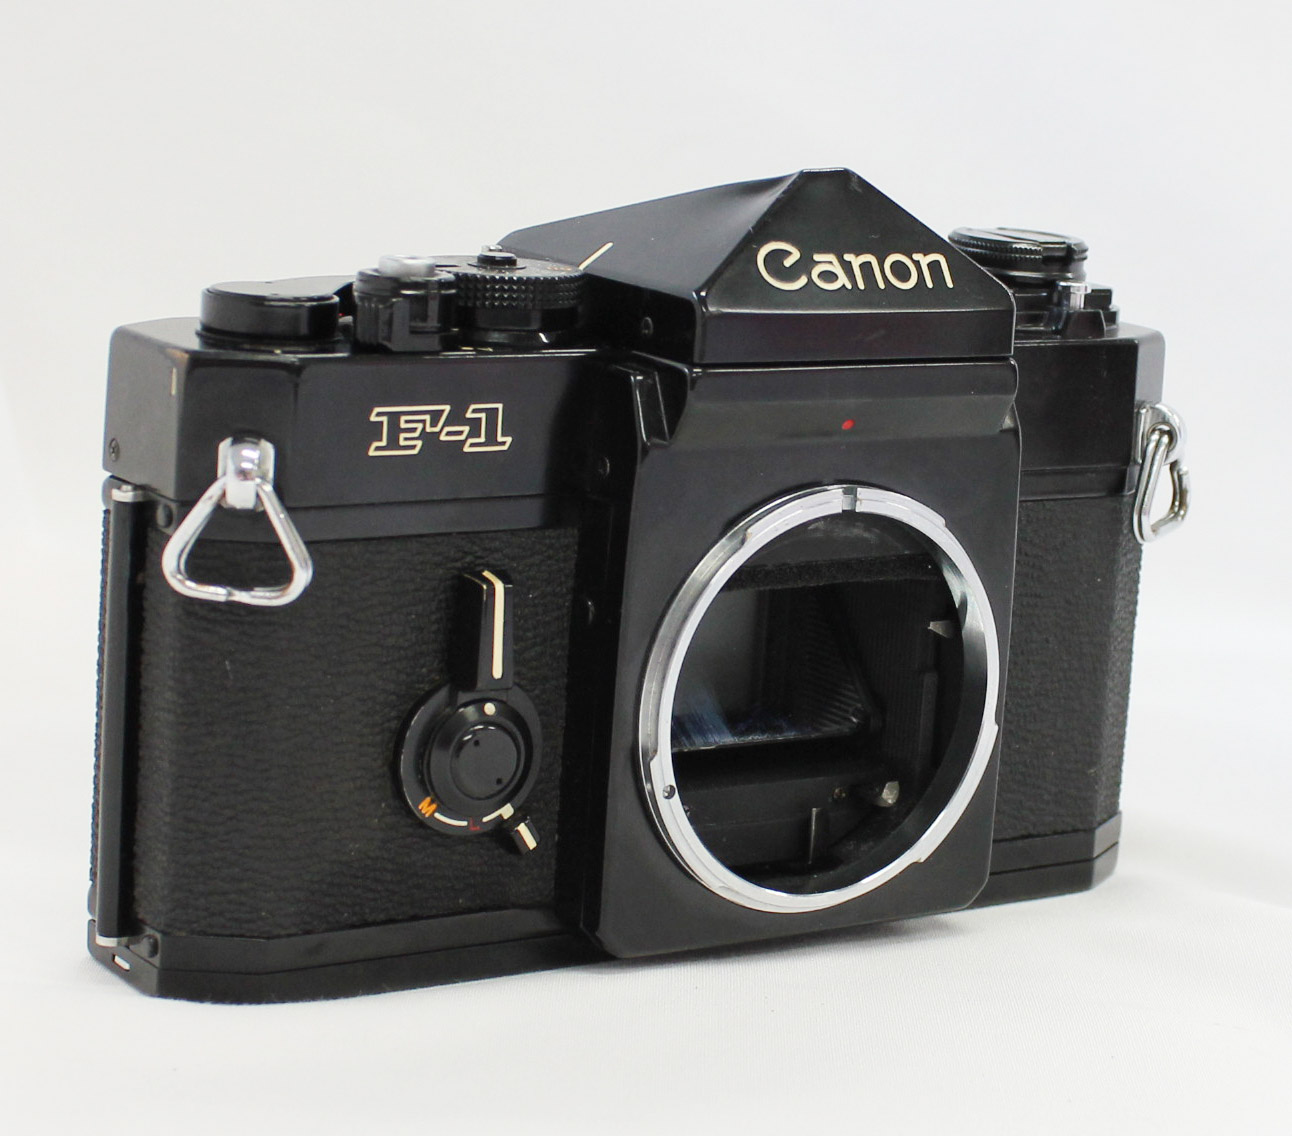  Canon F-1 35mm SLR Film Camera Body with Case and Strap from Japan Photo 1